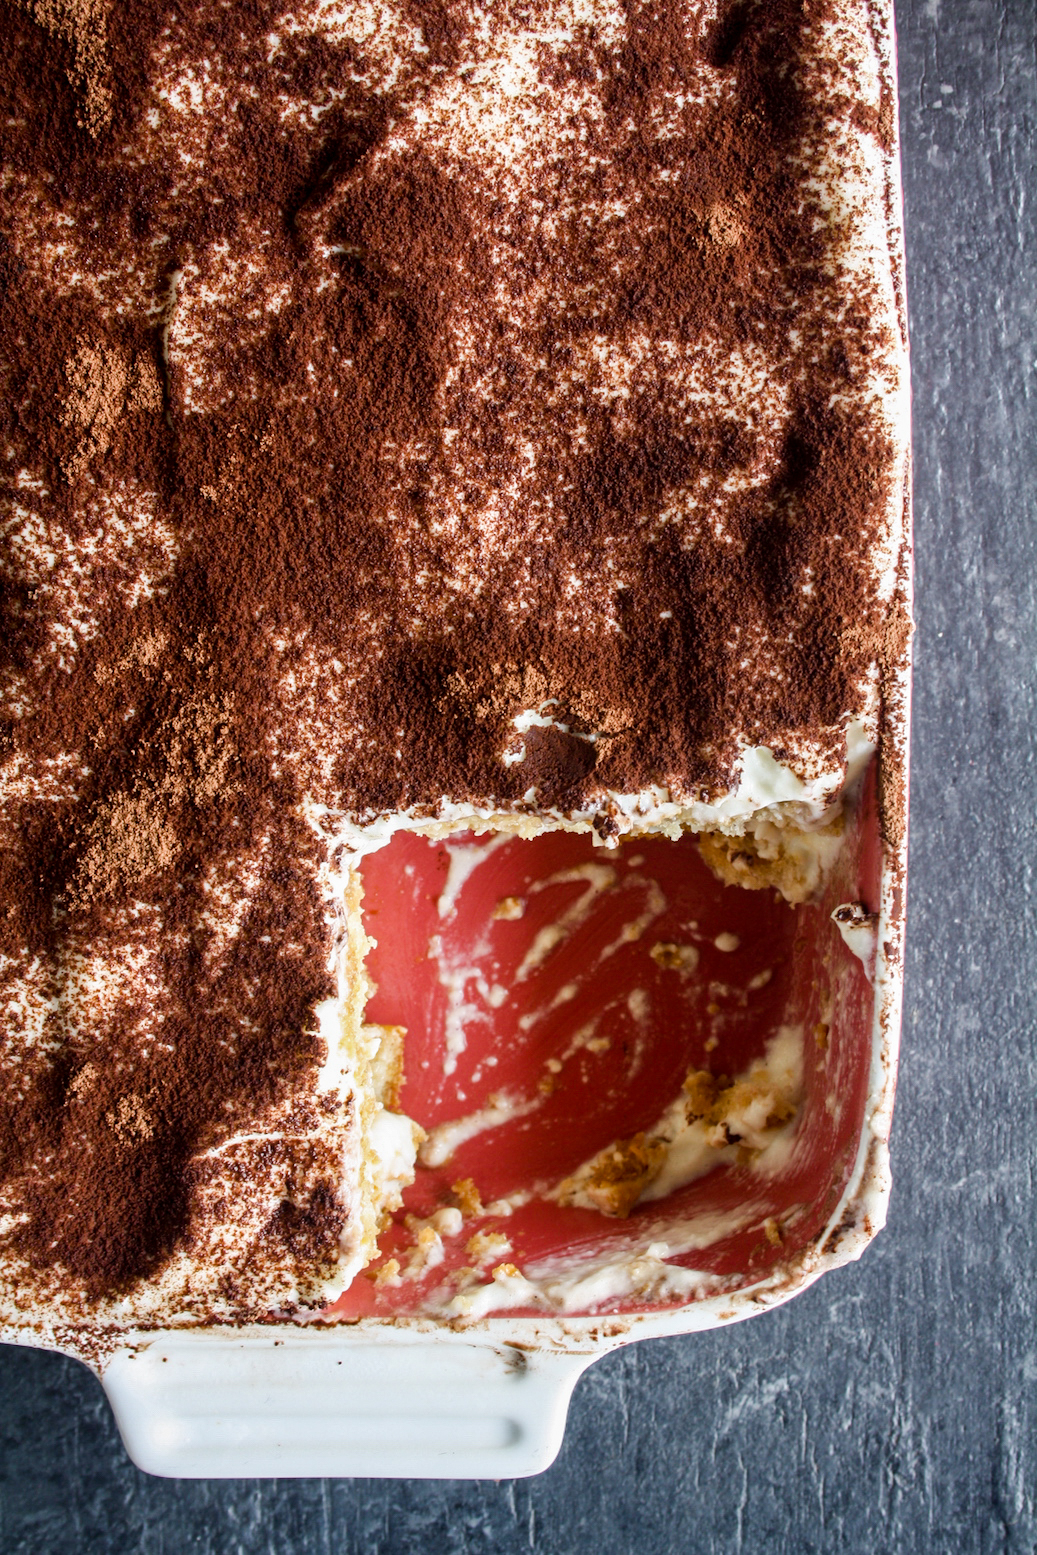 Light and creamy tiramisu with a lovely coffee flavour and eggless topping